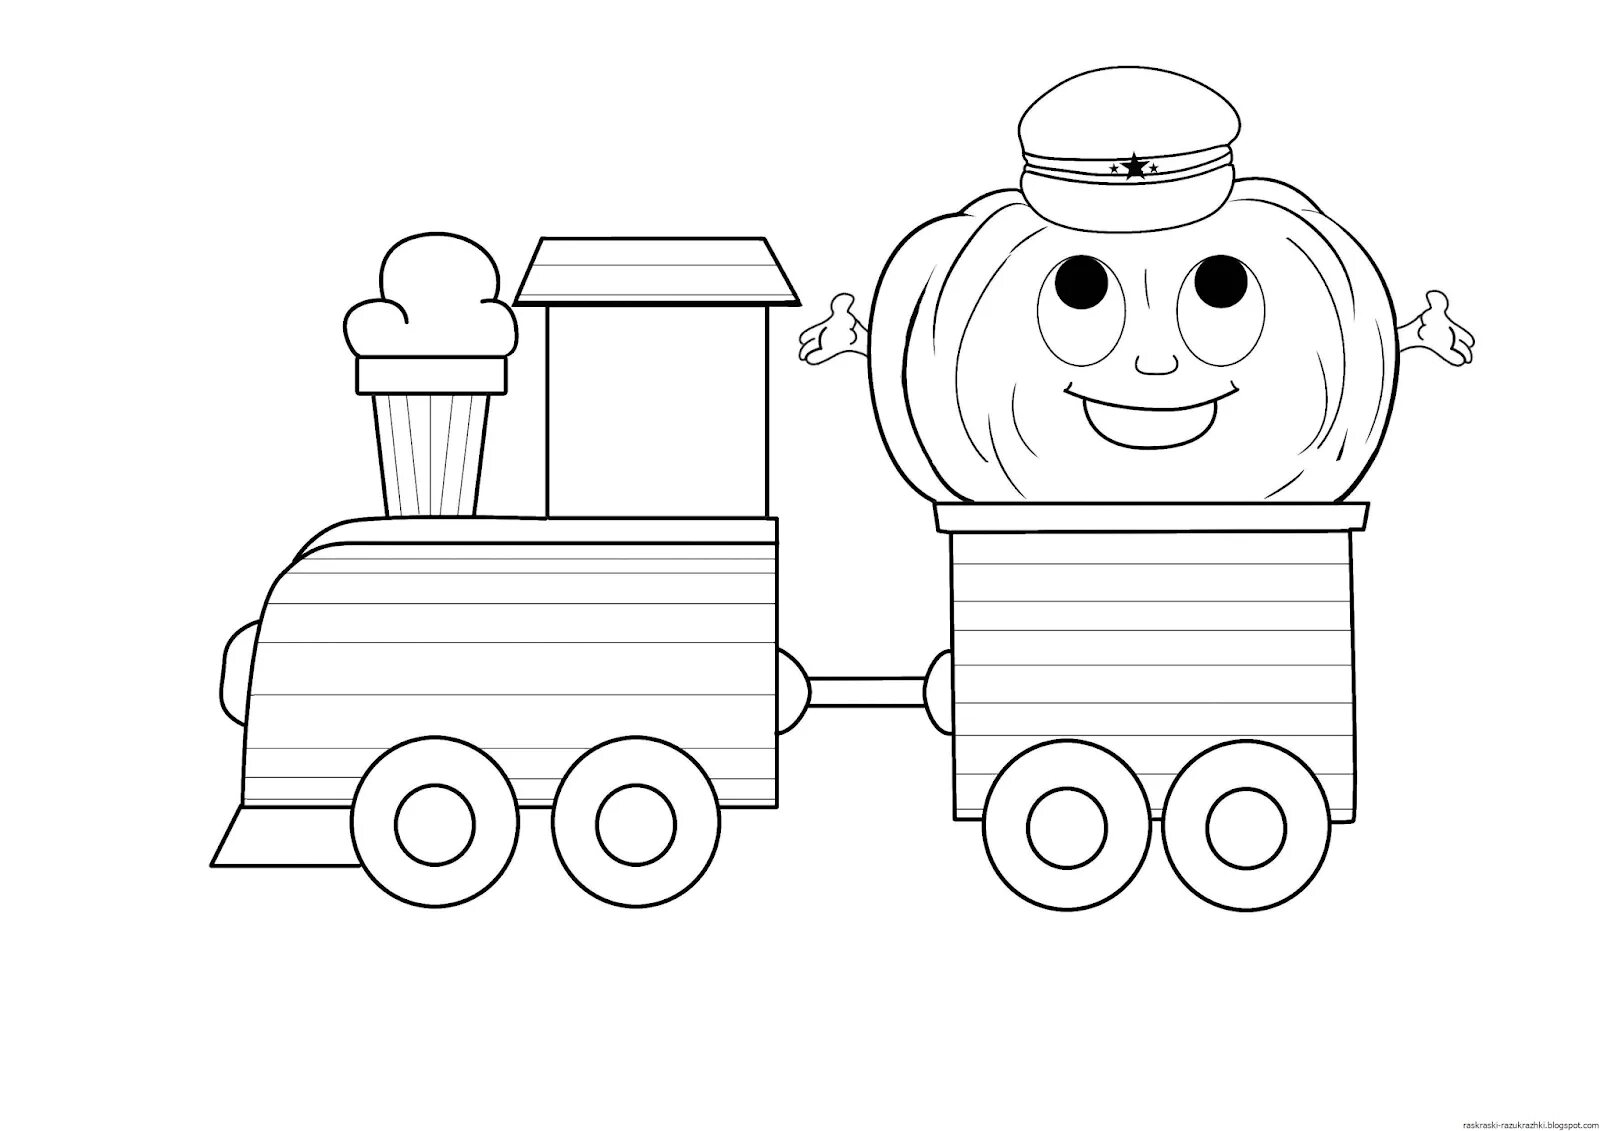 Colorful train coloring book for 2-3 year olds